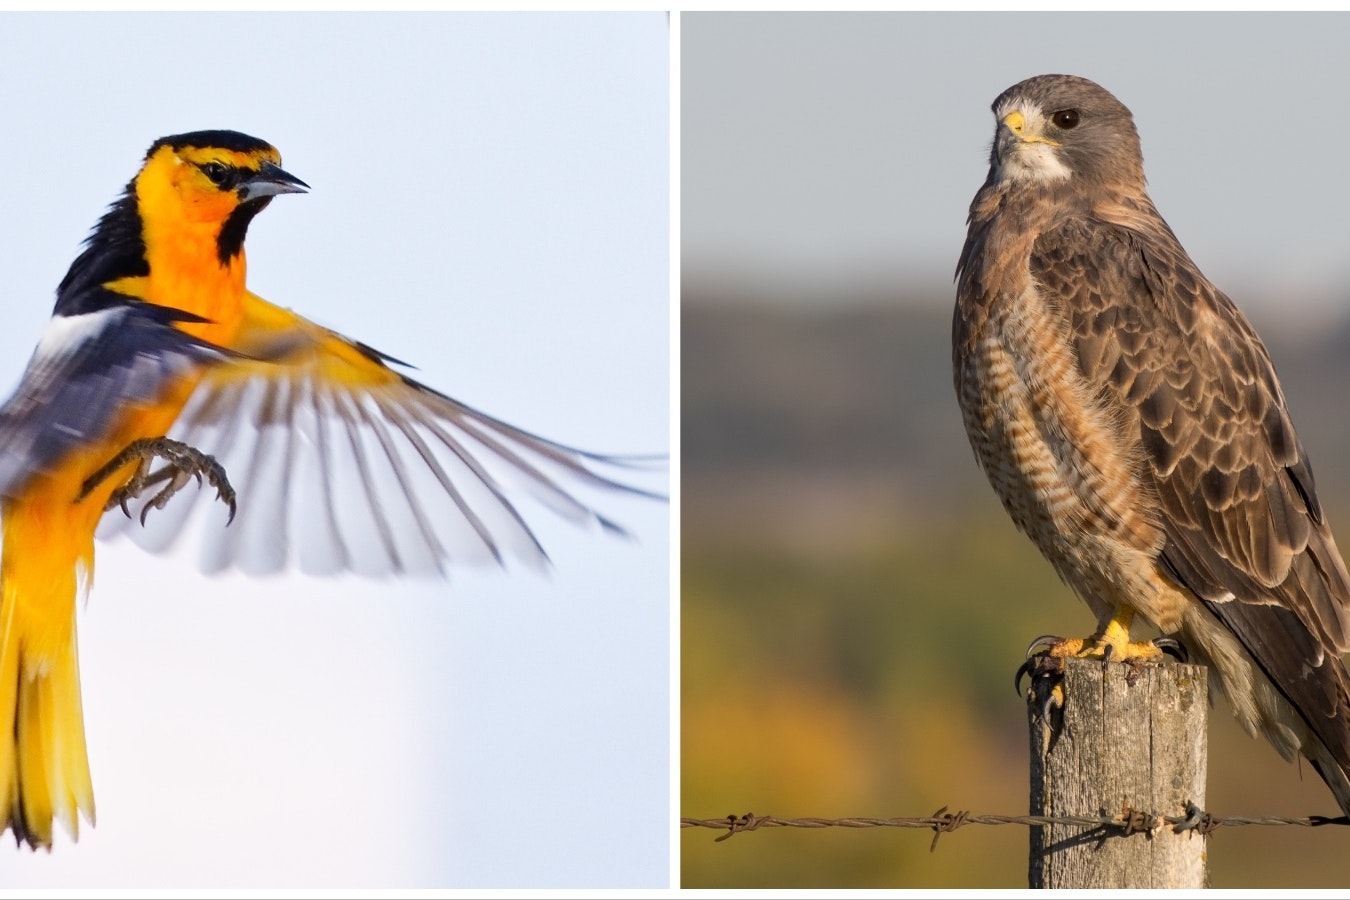 The Bullock's oriole, left, and Swainson's hawk are two of dozens of birds that will be renamed in a move to not associate birds with people who may have controversial pasts.